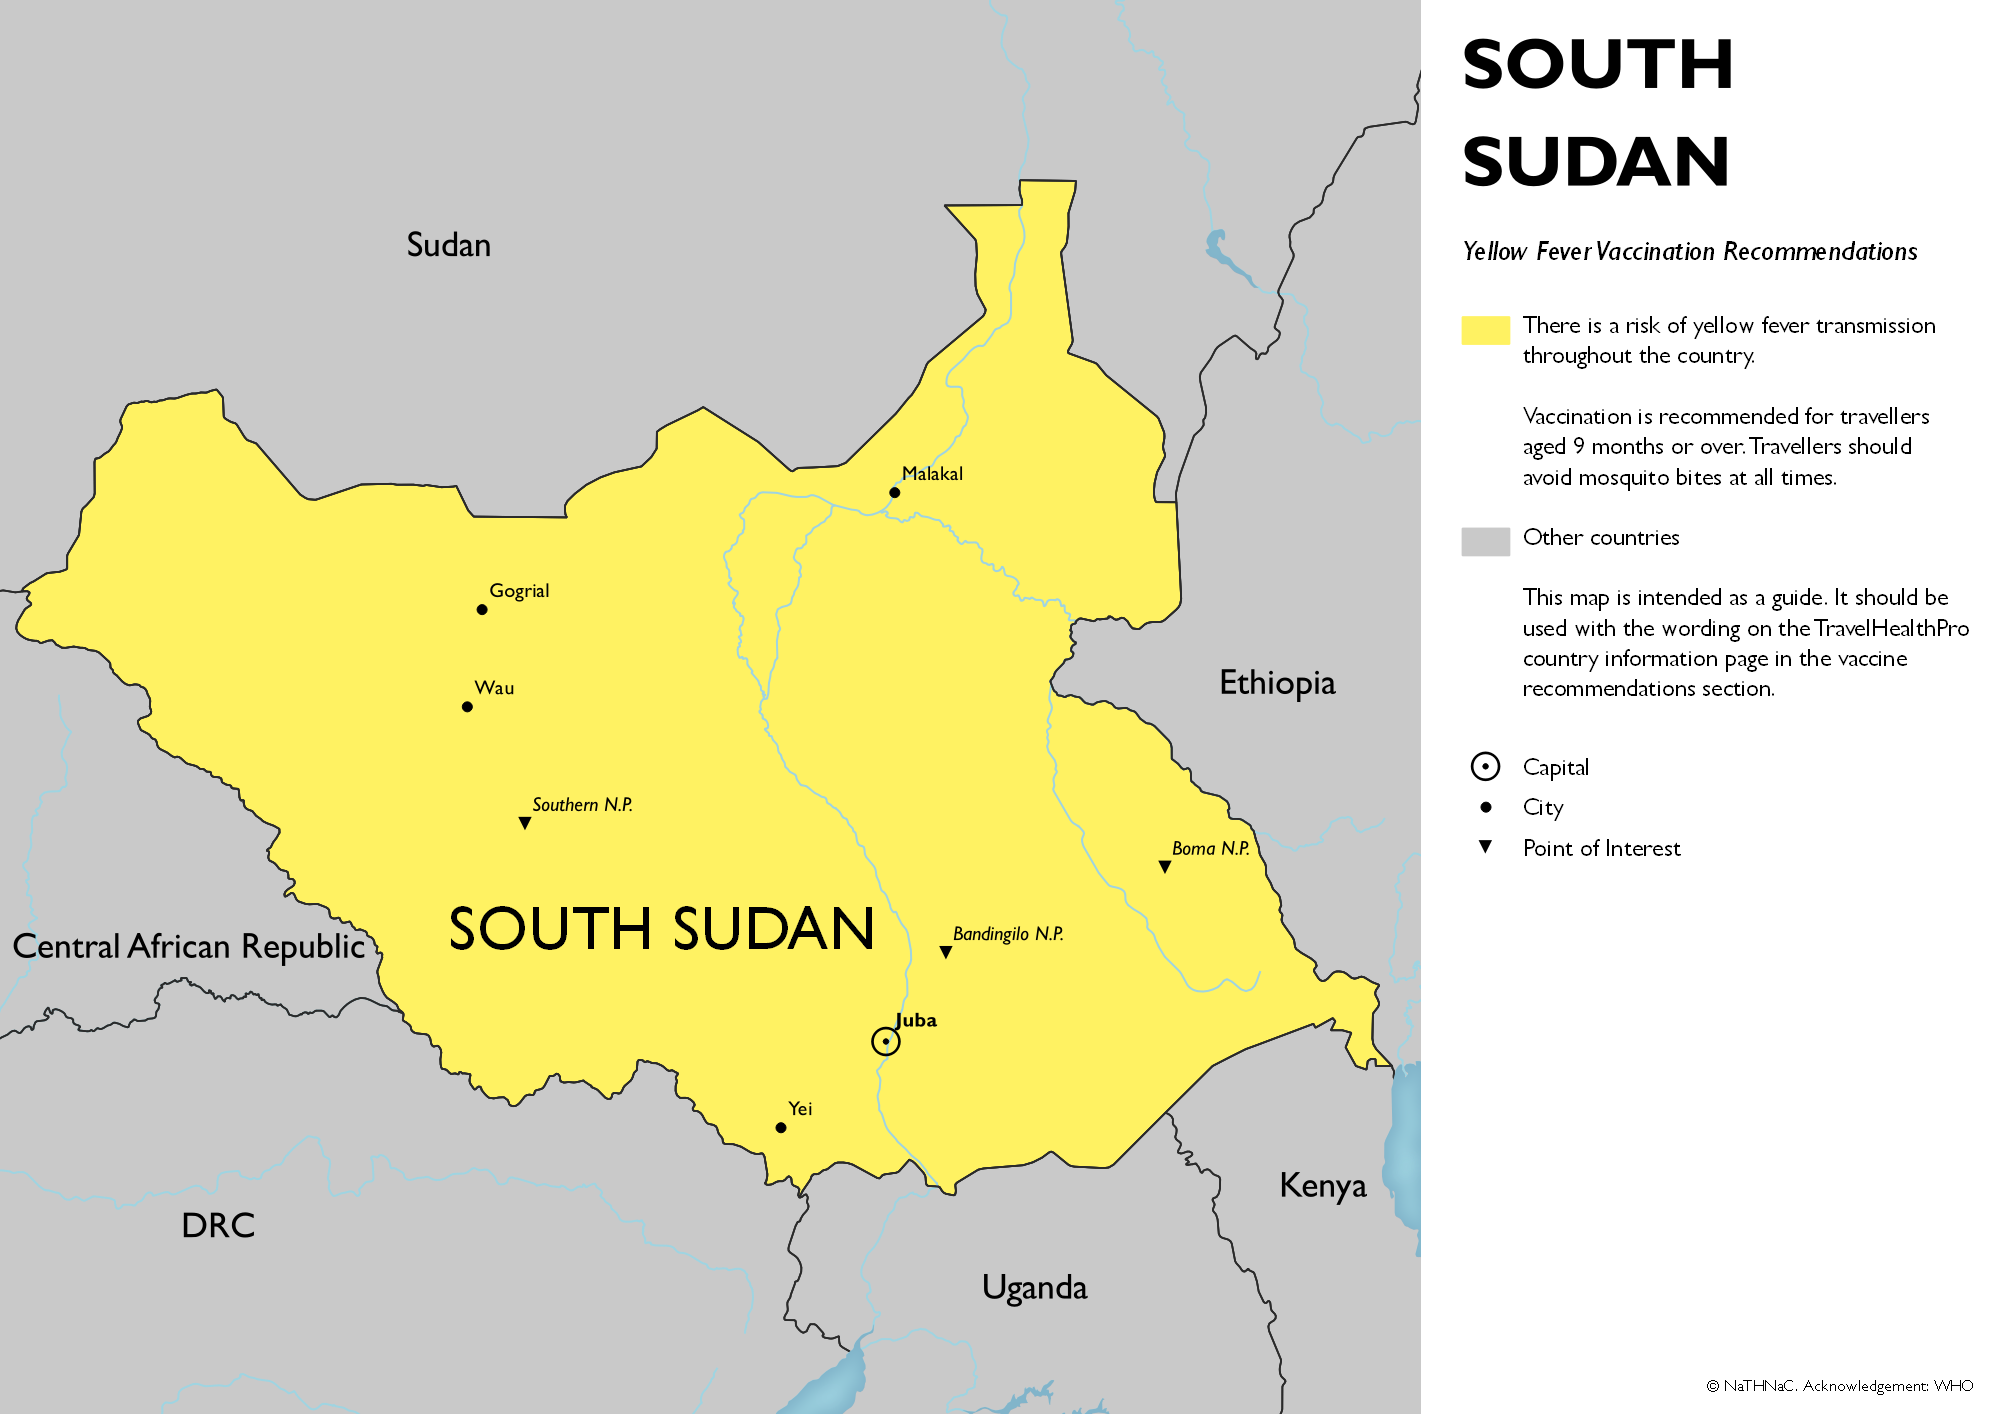 Yellow fever vaccine recommendation map for South Sudan